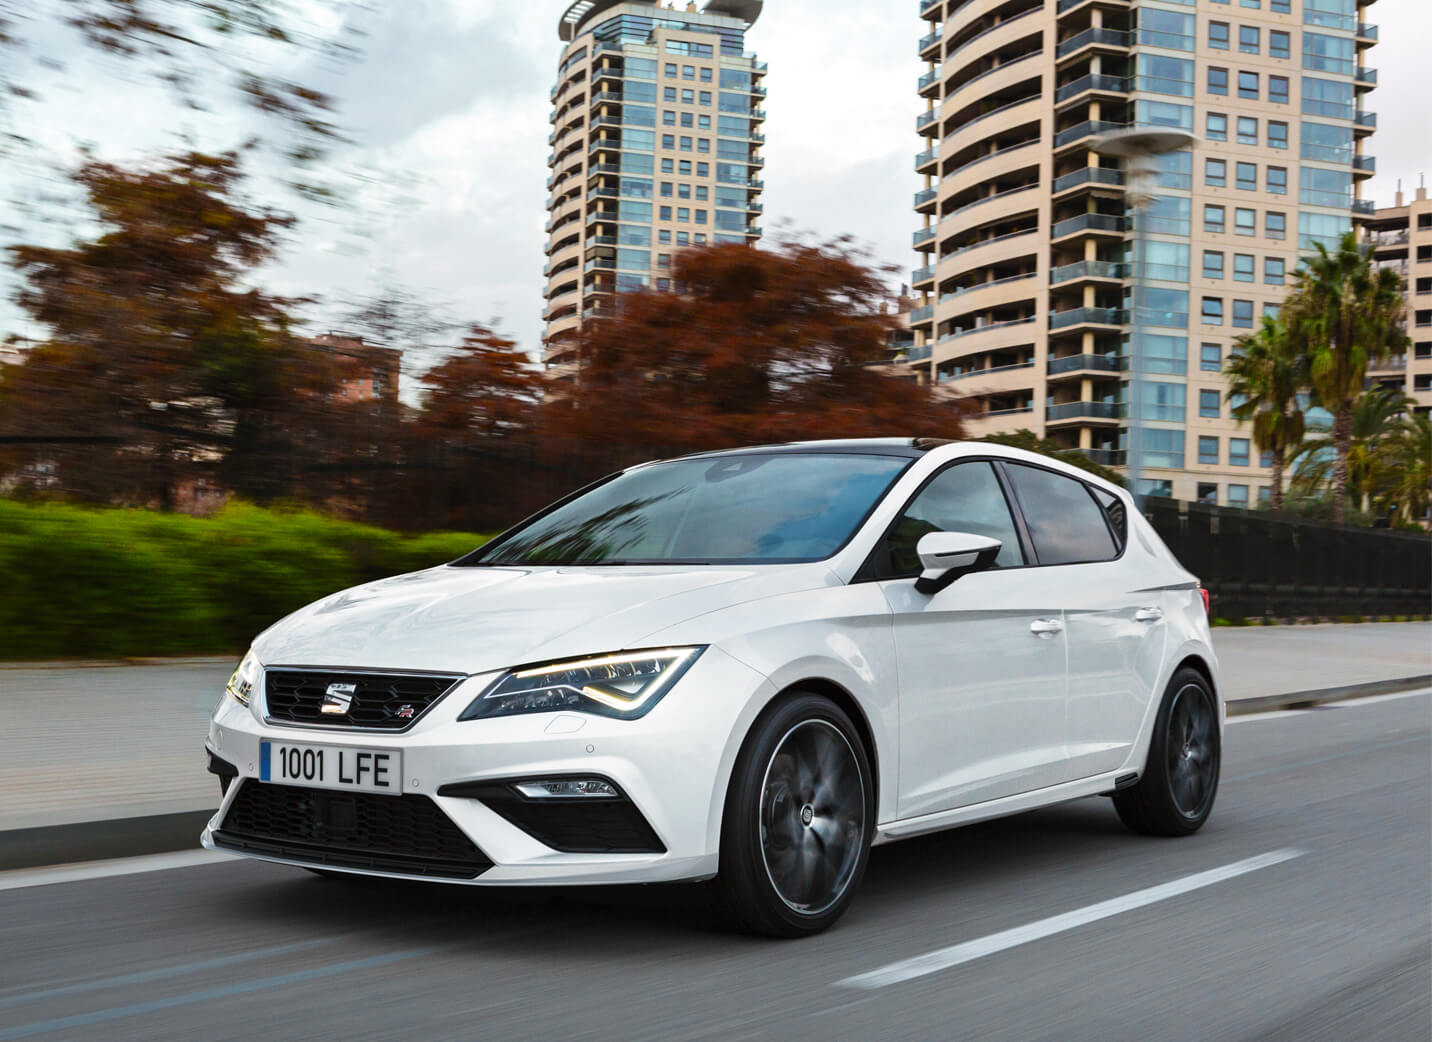 SEAT new car services and maintenance – new SEAT Leon white city car driving